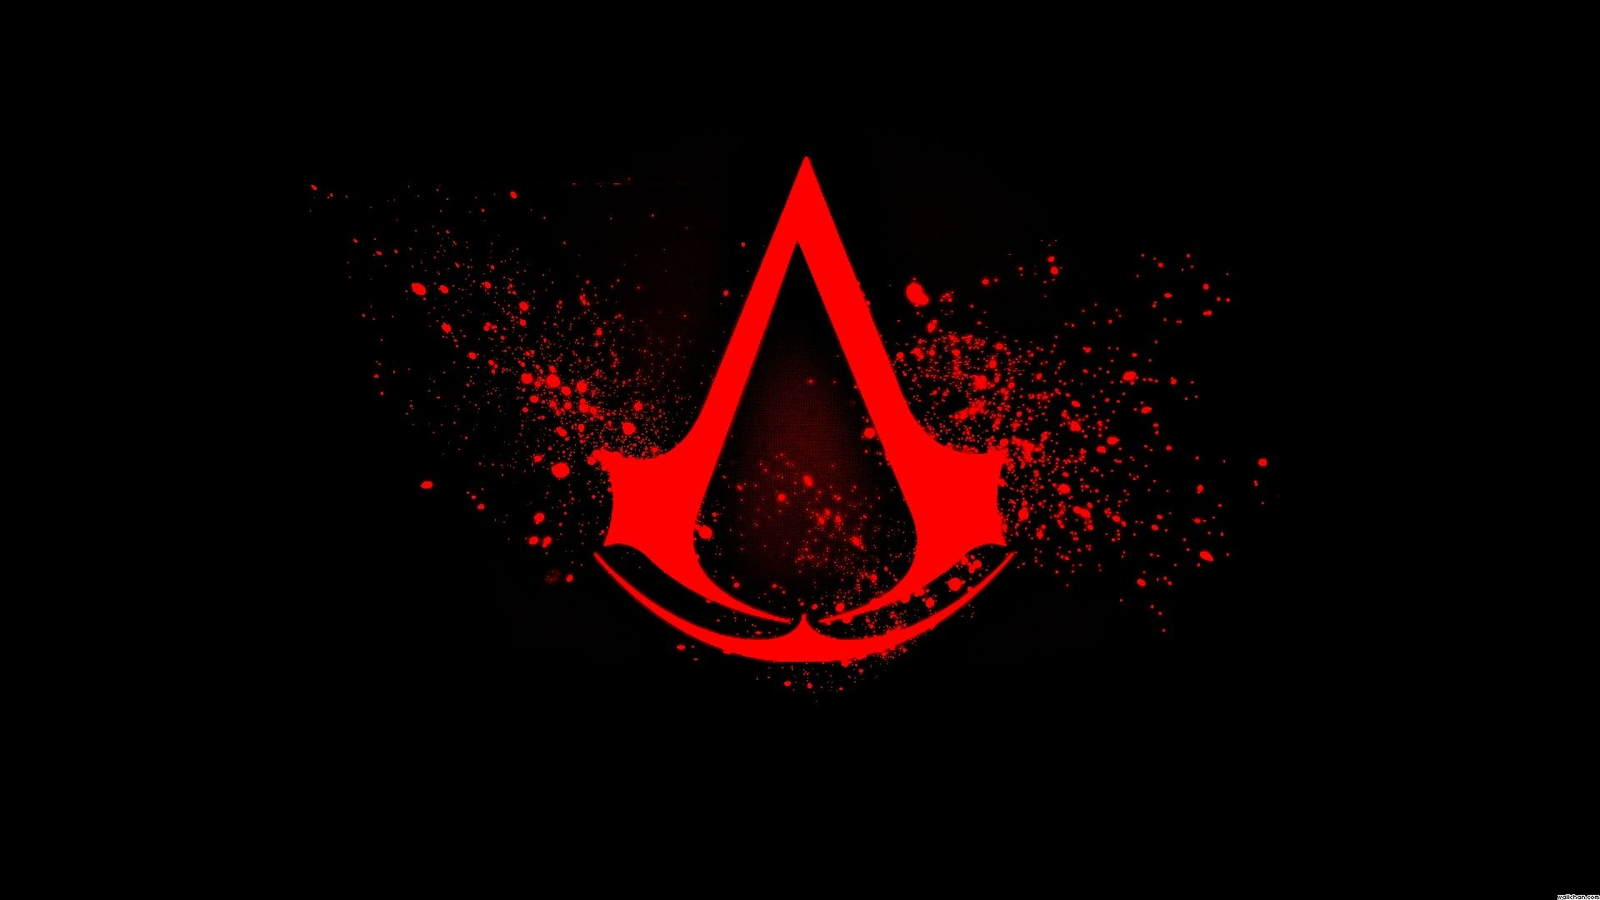 When Assassin's Creed Red Could Take Place